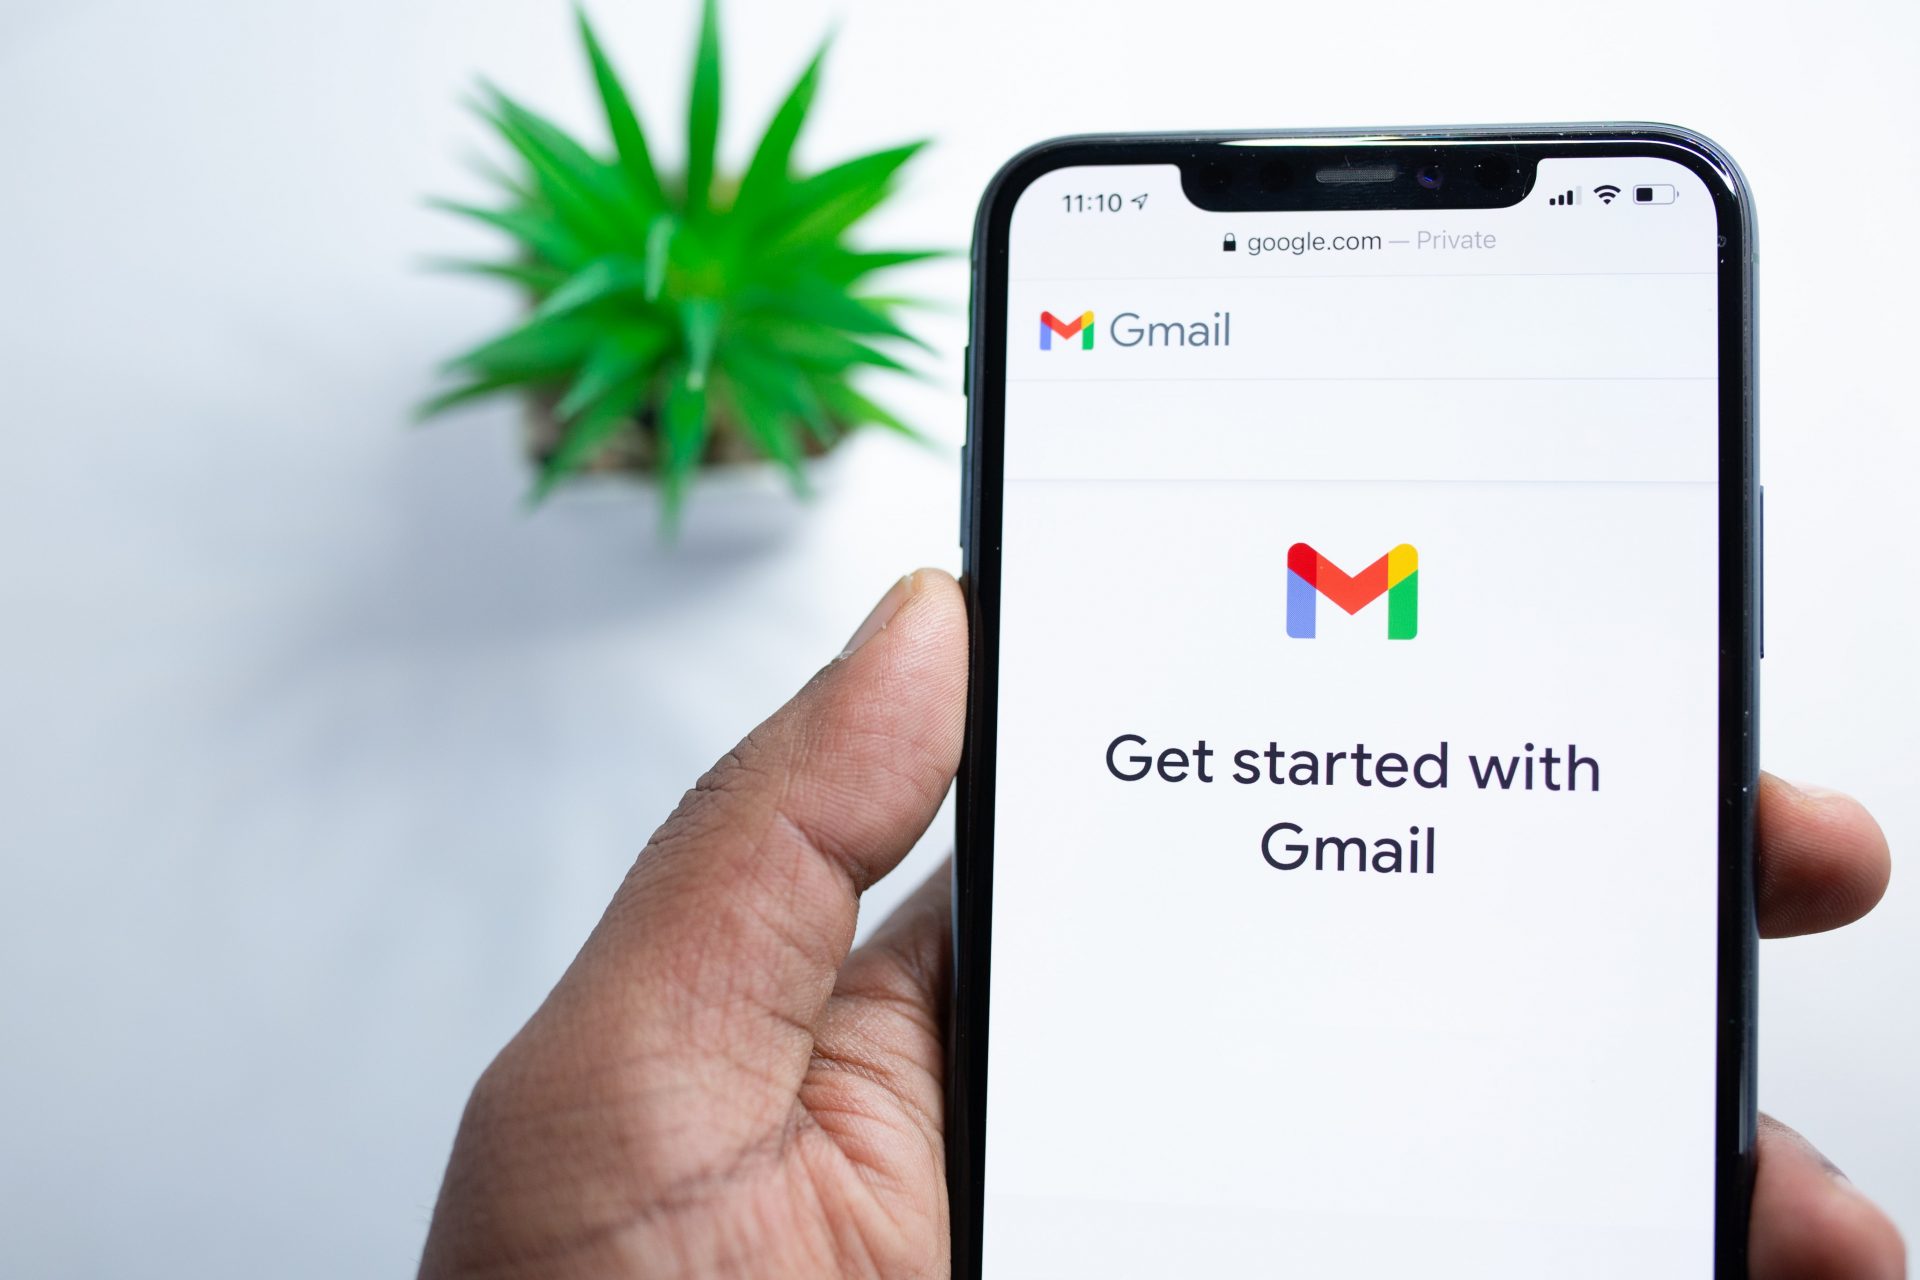 How Are Gmail And Social Media Connected?